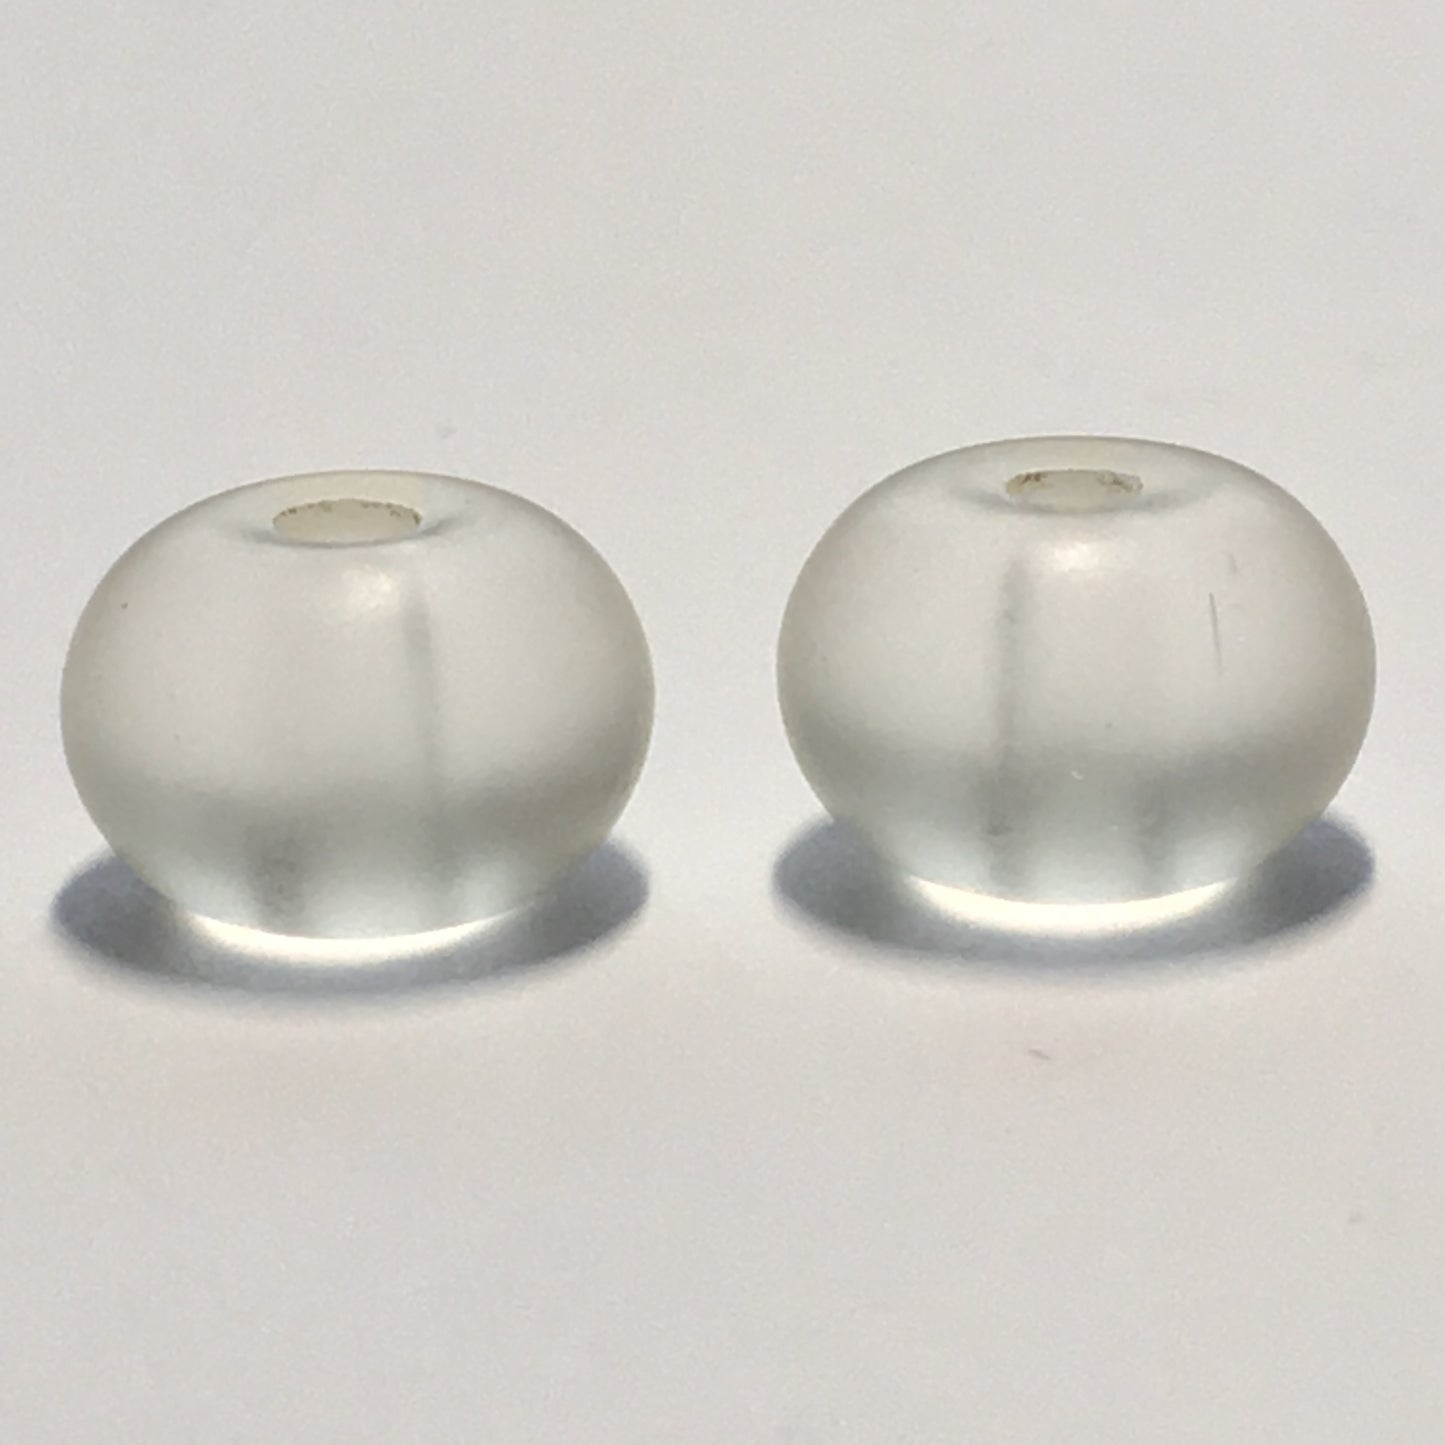 Frosted Clear Glass Rondelle Beads, 6 x 10 mm, 2 Beads